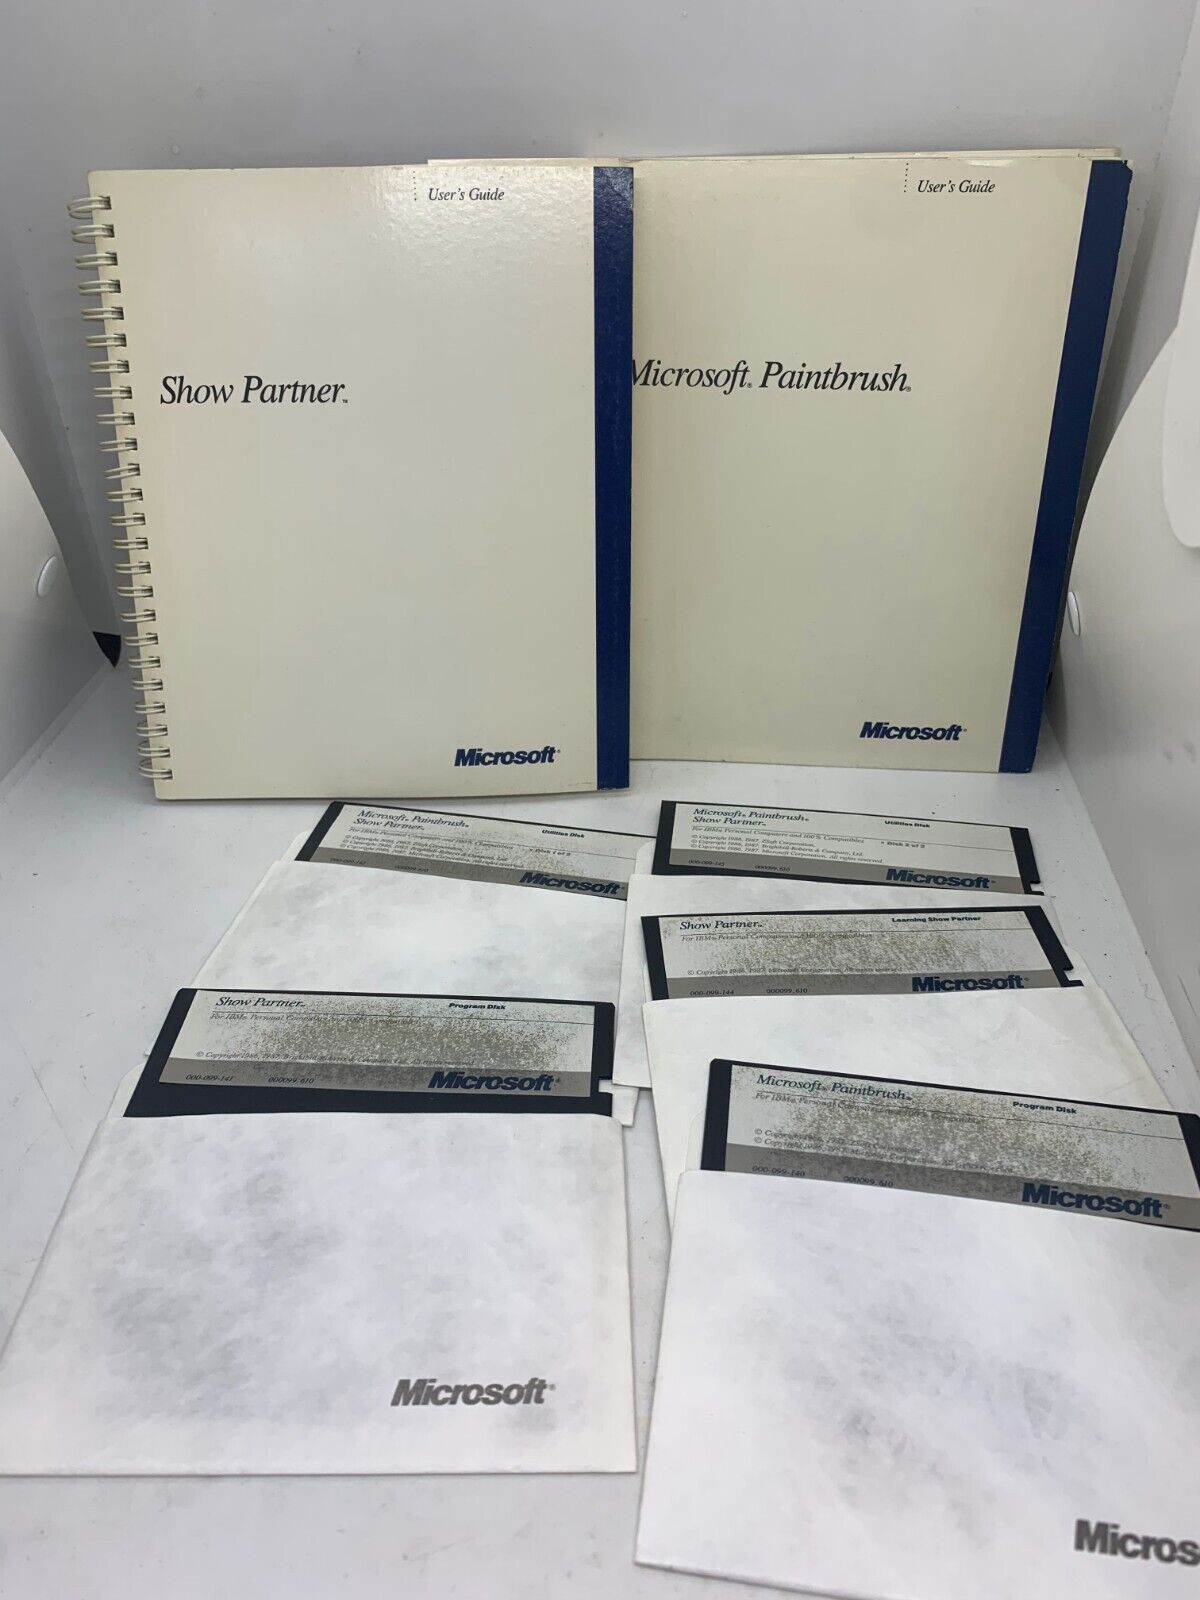 1986 Microsoft Show Partner & Paintbrush User Guide For IBM Personal Computer